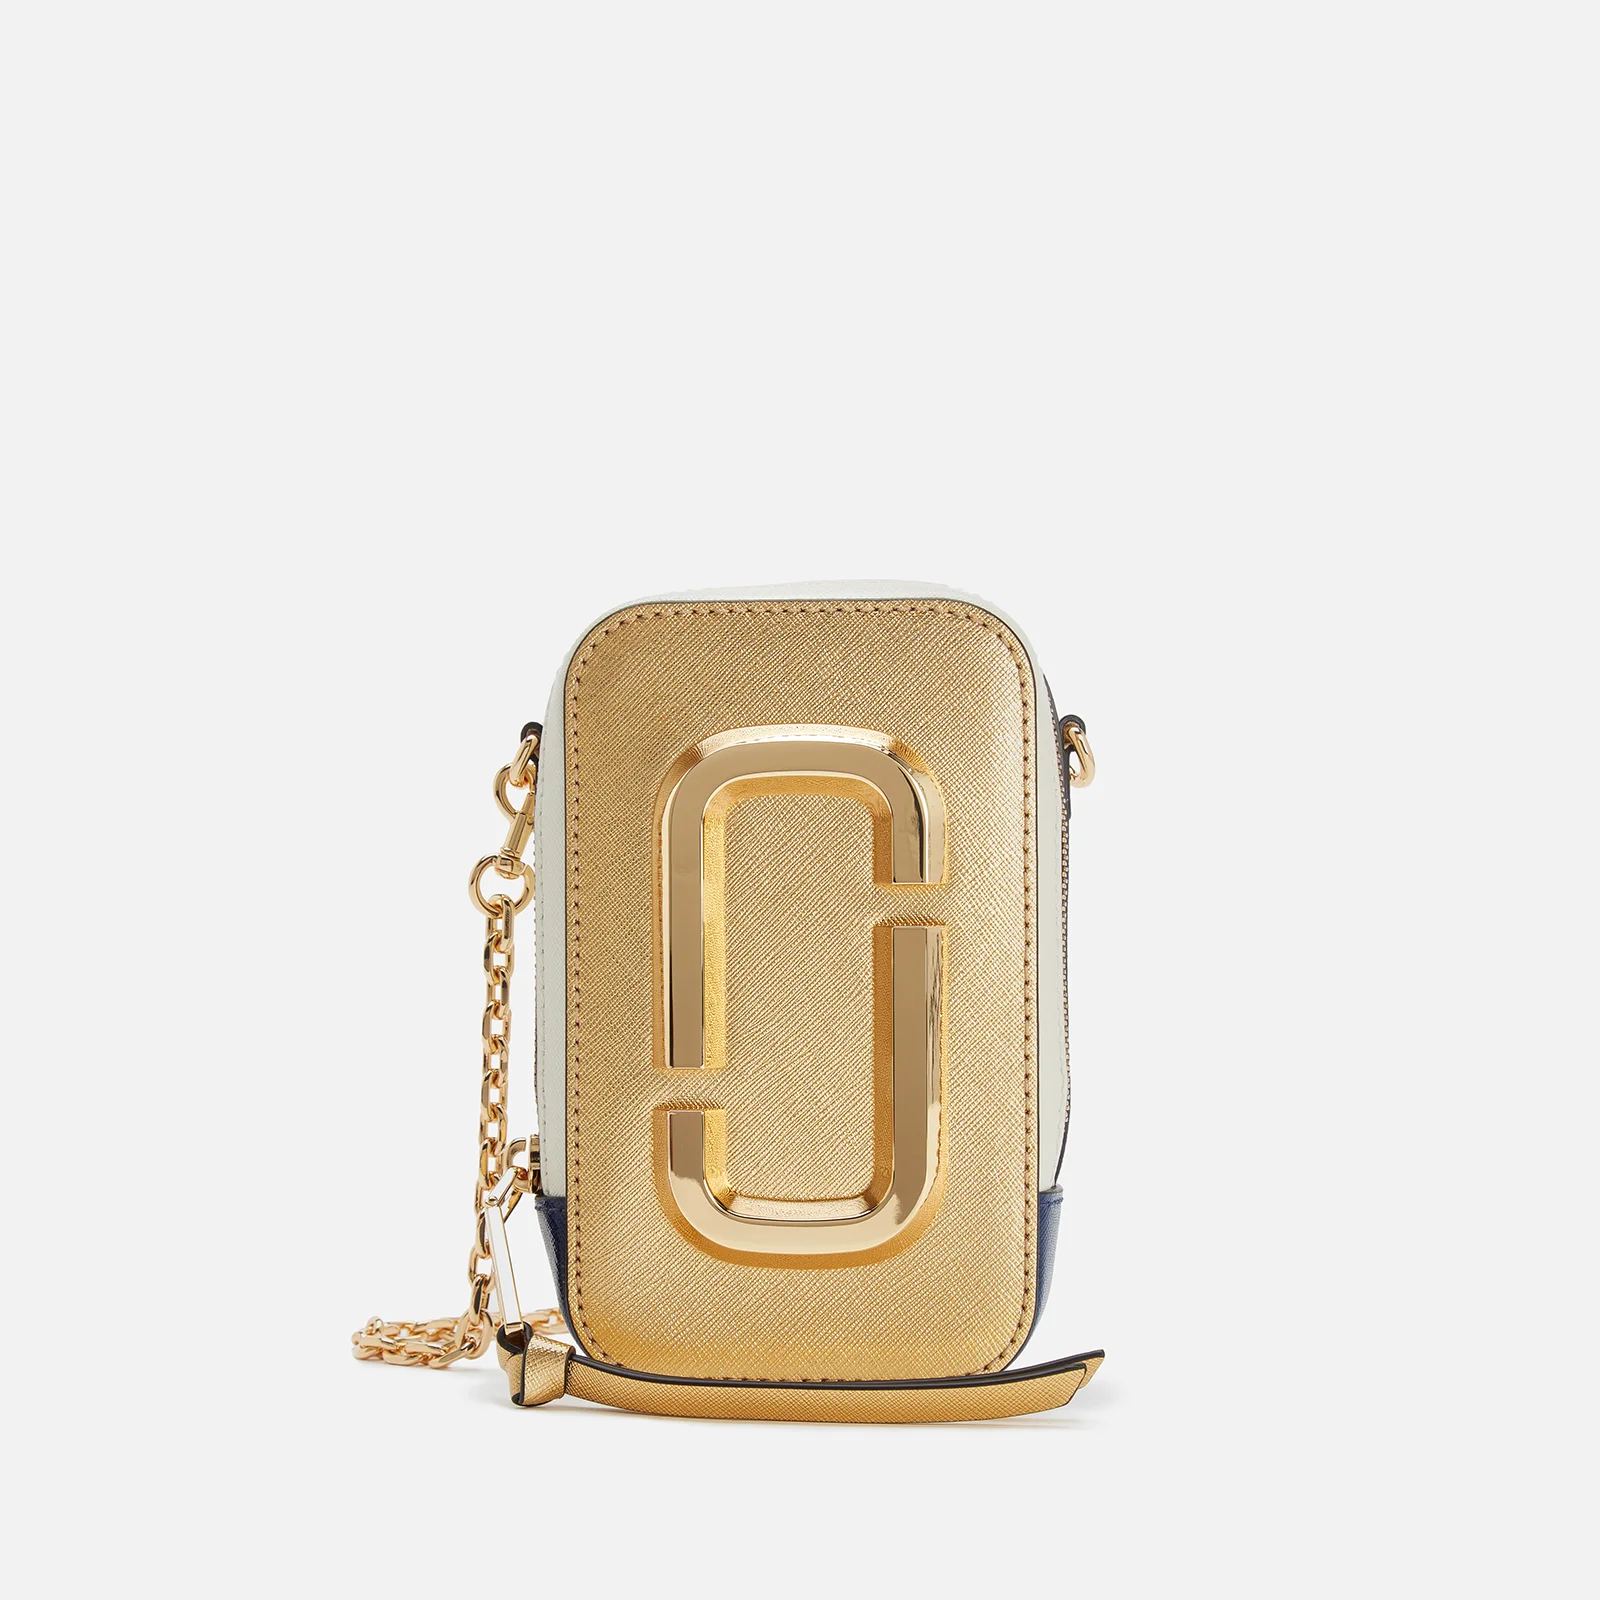 Marc Jacobs Women's The Hot Shot - Gold Multi Image 1